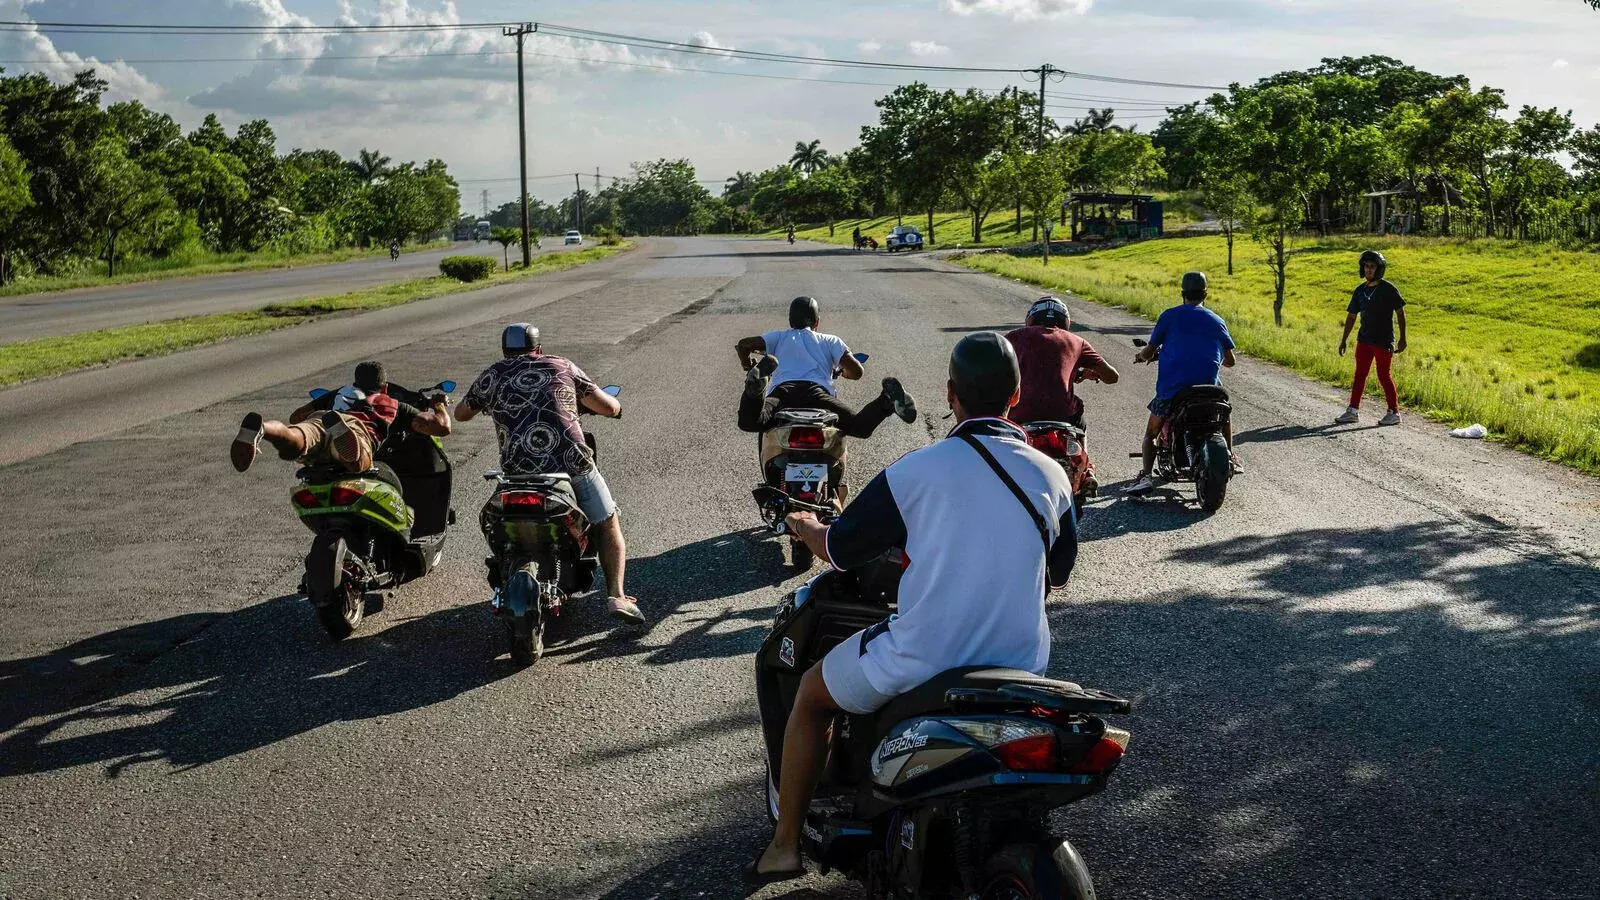  Electric motorcycles are changing the urban landscape in Cuba and also creating challenges: the batteries tend to catch fire and their relative silence accompanied by driver inexperience is causing traffic accidents.